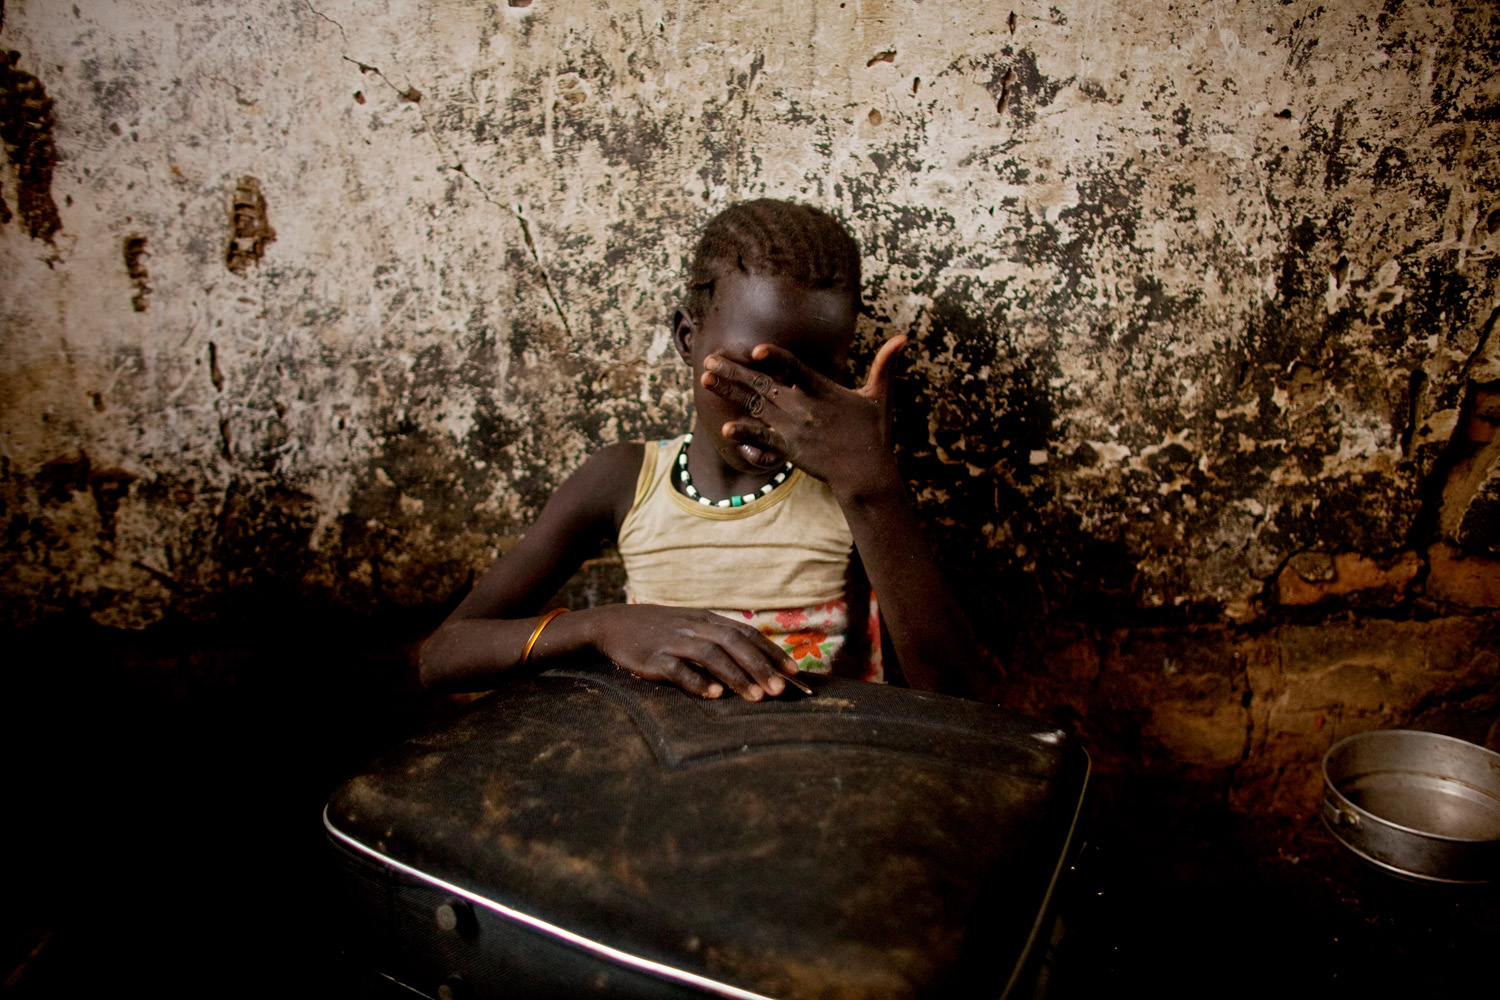 May 26, 2011. Atong Aken, age 9, weeps while clutching a suitcase in a makeshift internally displaced persons camps in Mayan Abun, southern Sudan. While fleeing heavy fighting in the border town of Abyei, Atong became separated from her mother. Heavy fighting and the rapid exodus from Abyei left many families separated. Tens of thousands fled heavy fighting in the hotly contested border town earlier this week during an offensive that left the northern Sudanese military in effective control.